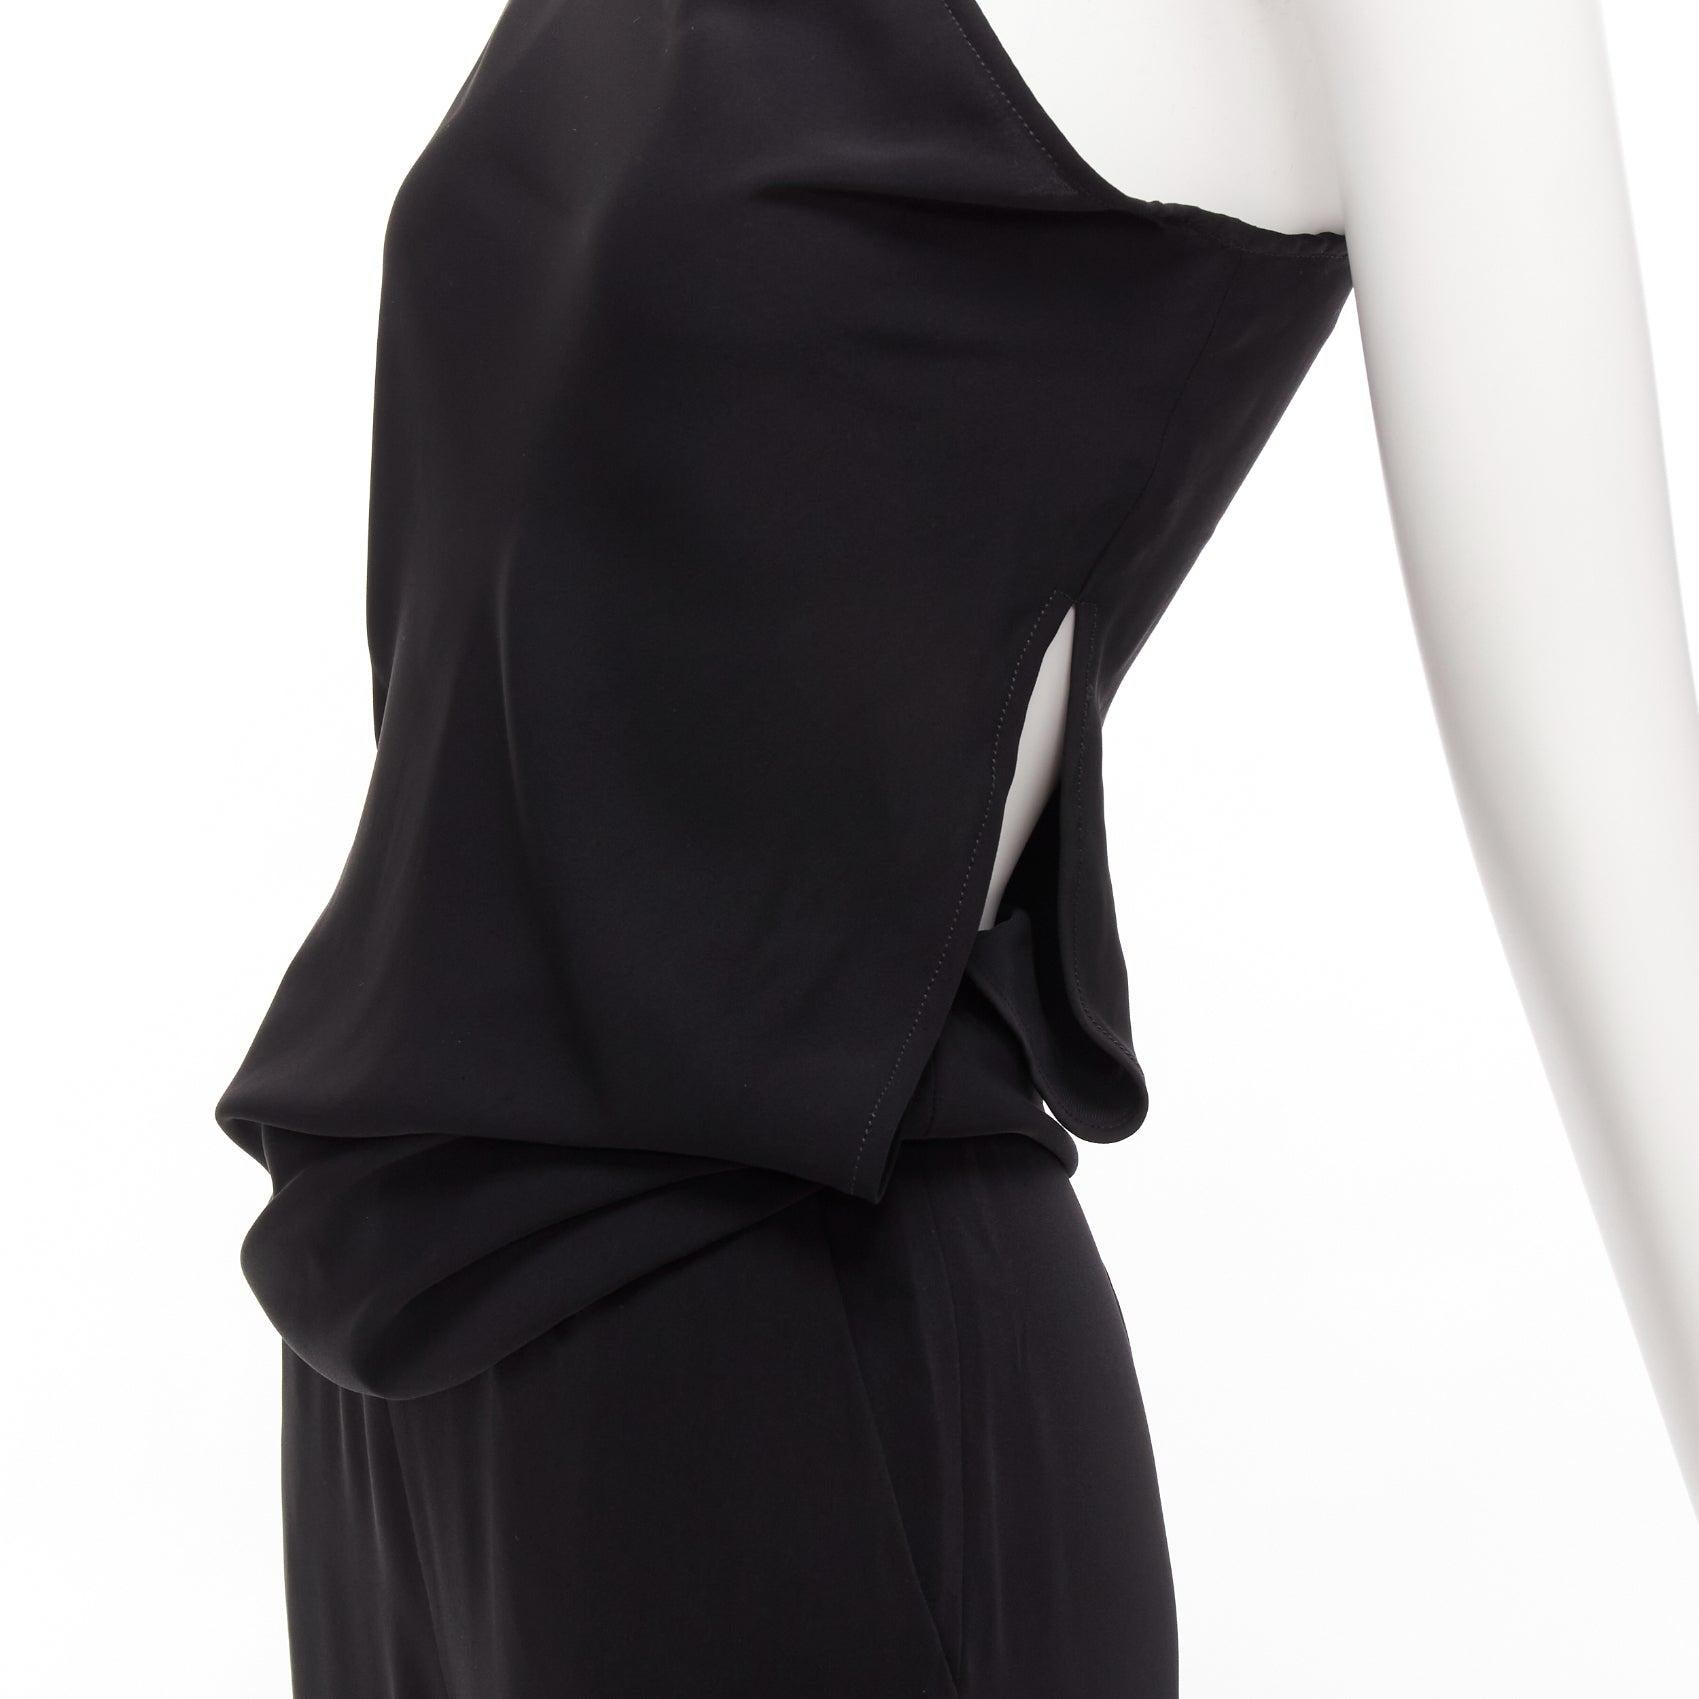 MAISON MARGIELA MM6 black one shoulder drape cut cropped jumpsuit FR36 S
Reference: AAWC/A01164
Brand: Maison Margiela
Collection: MM6
Material: Polyester
Color: Black
Pattern: Solid
Closure: Zip
Lining: Black Viscose
Extra Details: Side cut out at